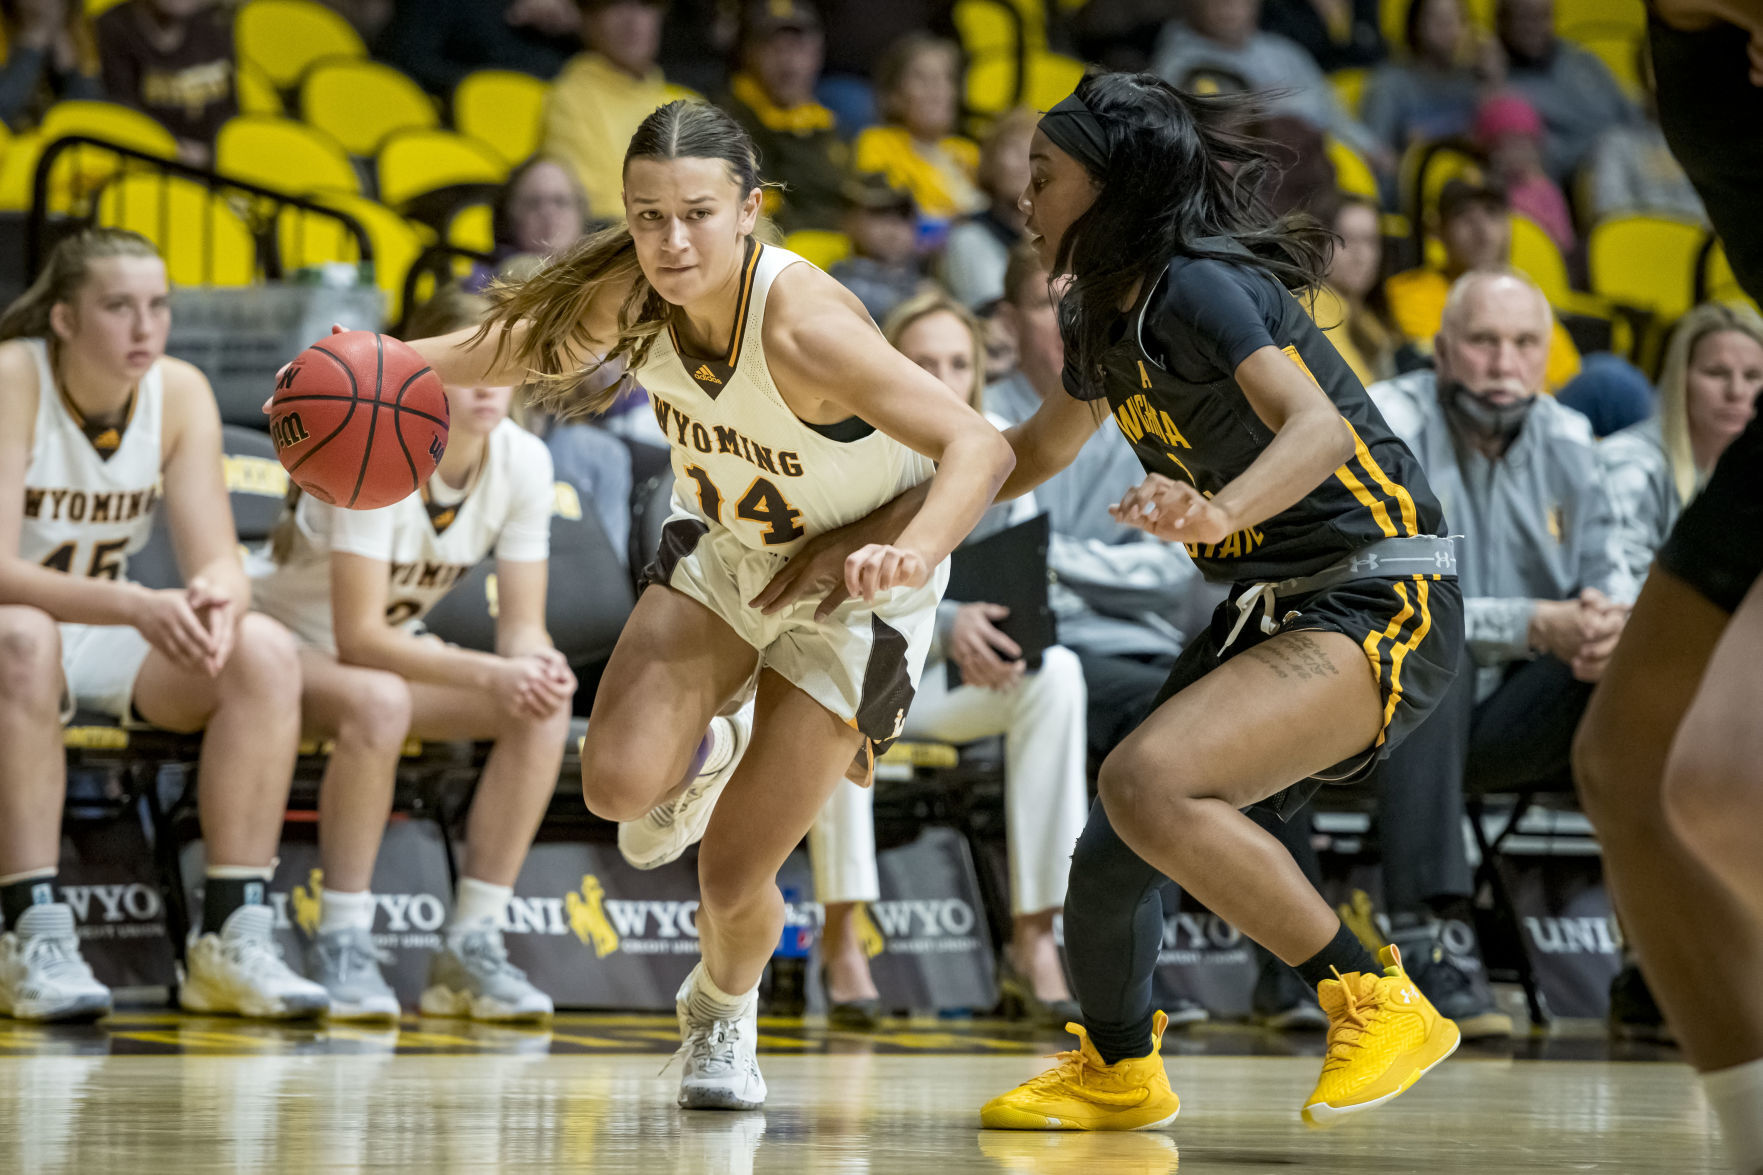 Omaha native Quinn Weidemann will have her own cheering section at PBA when Wyoming takes on Nebraska photo